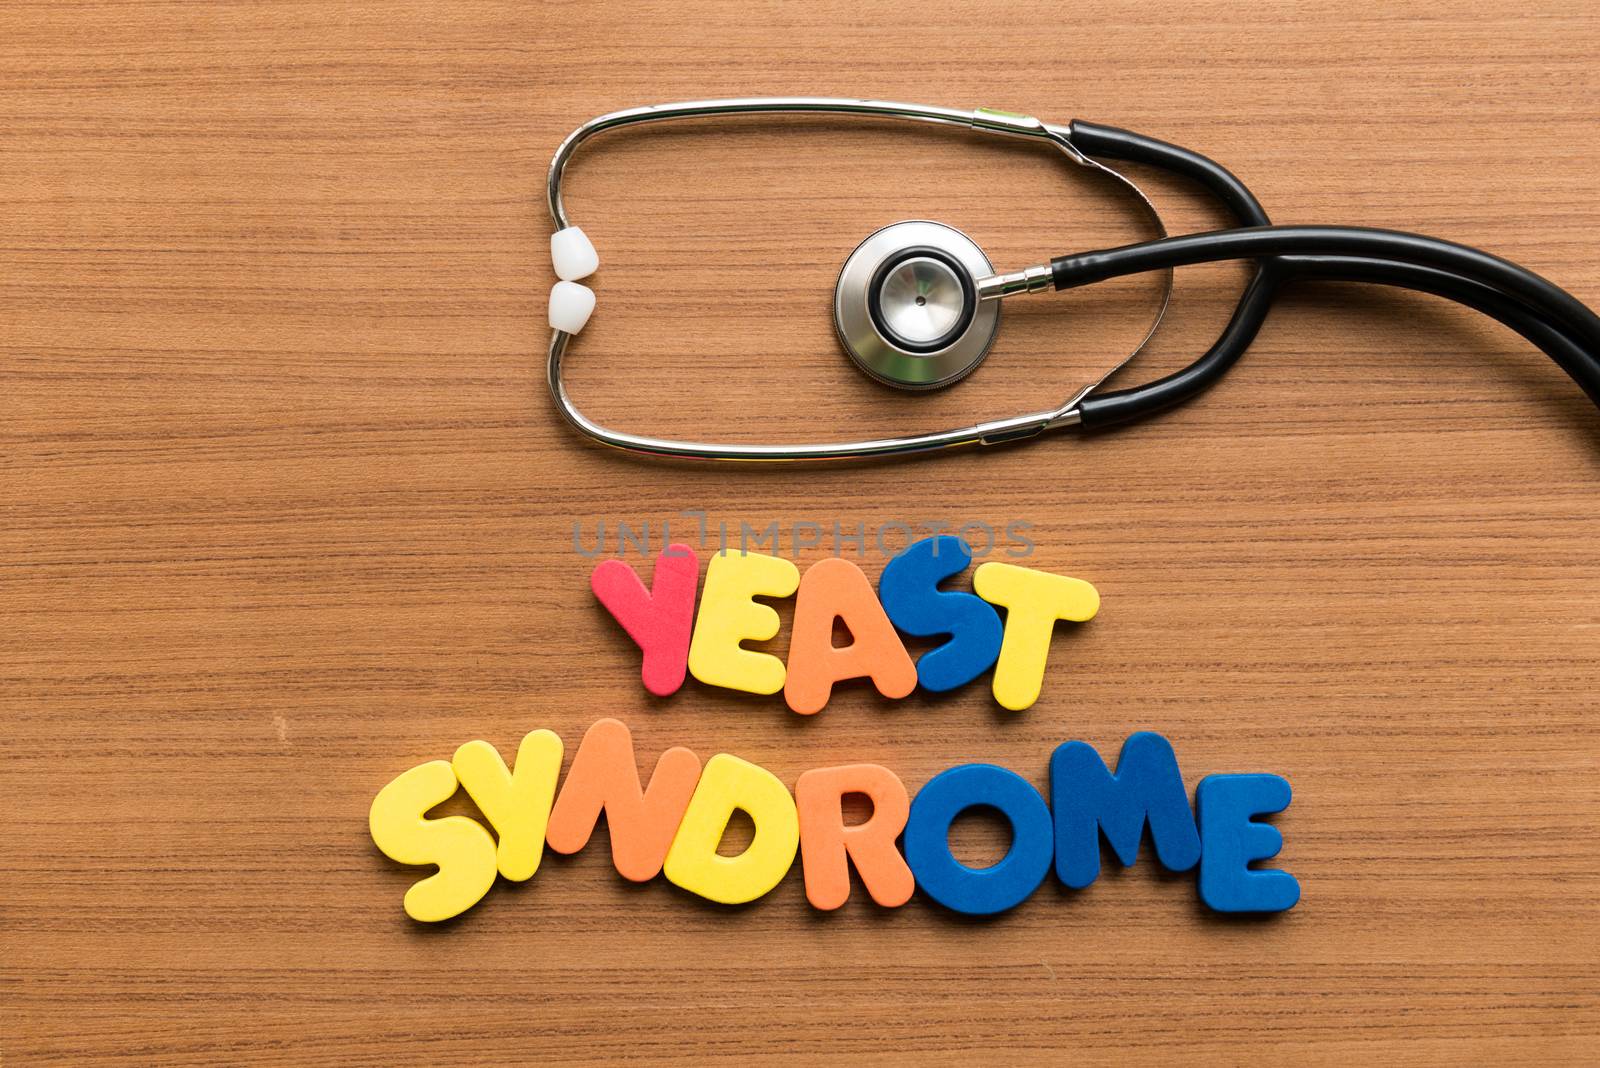 yeast syndrome colorful word with stethoscope by sohel.parvez@hotmail.com